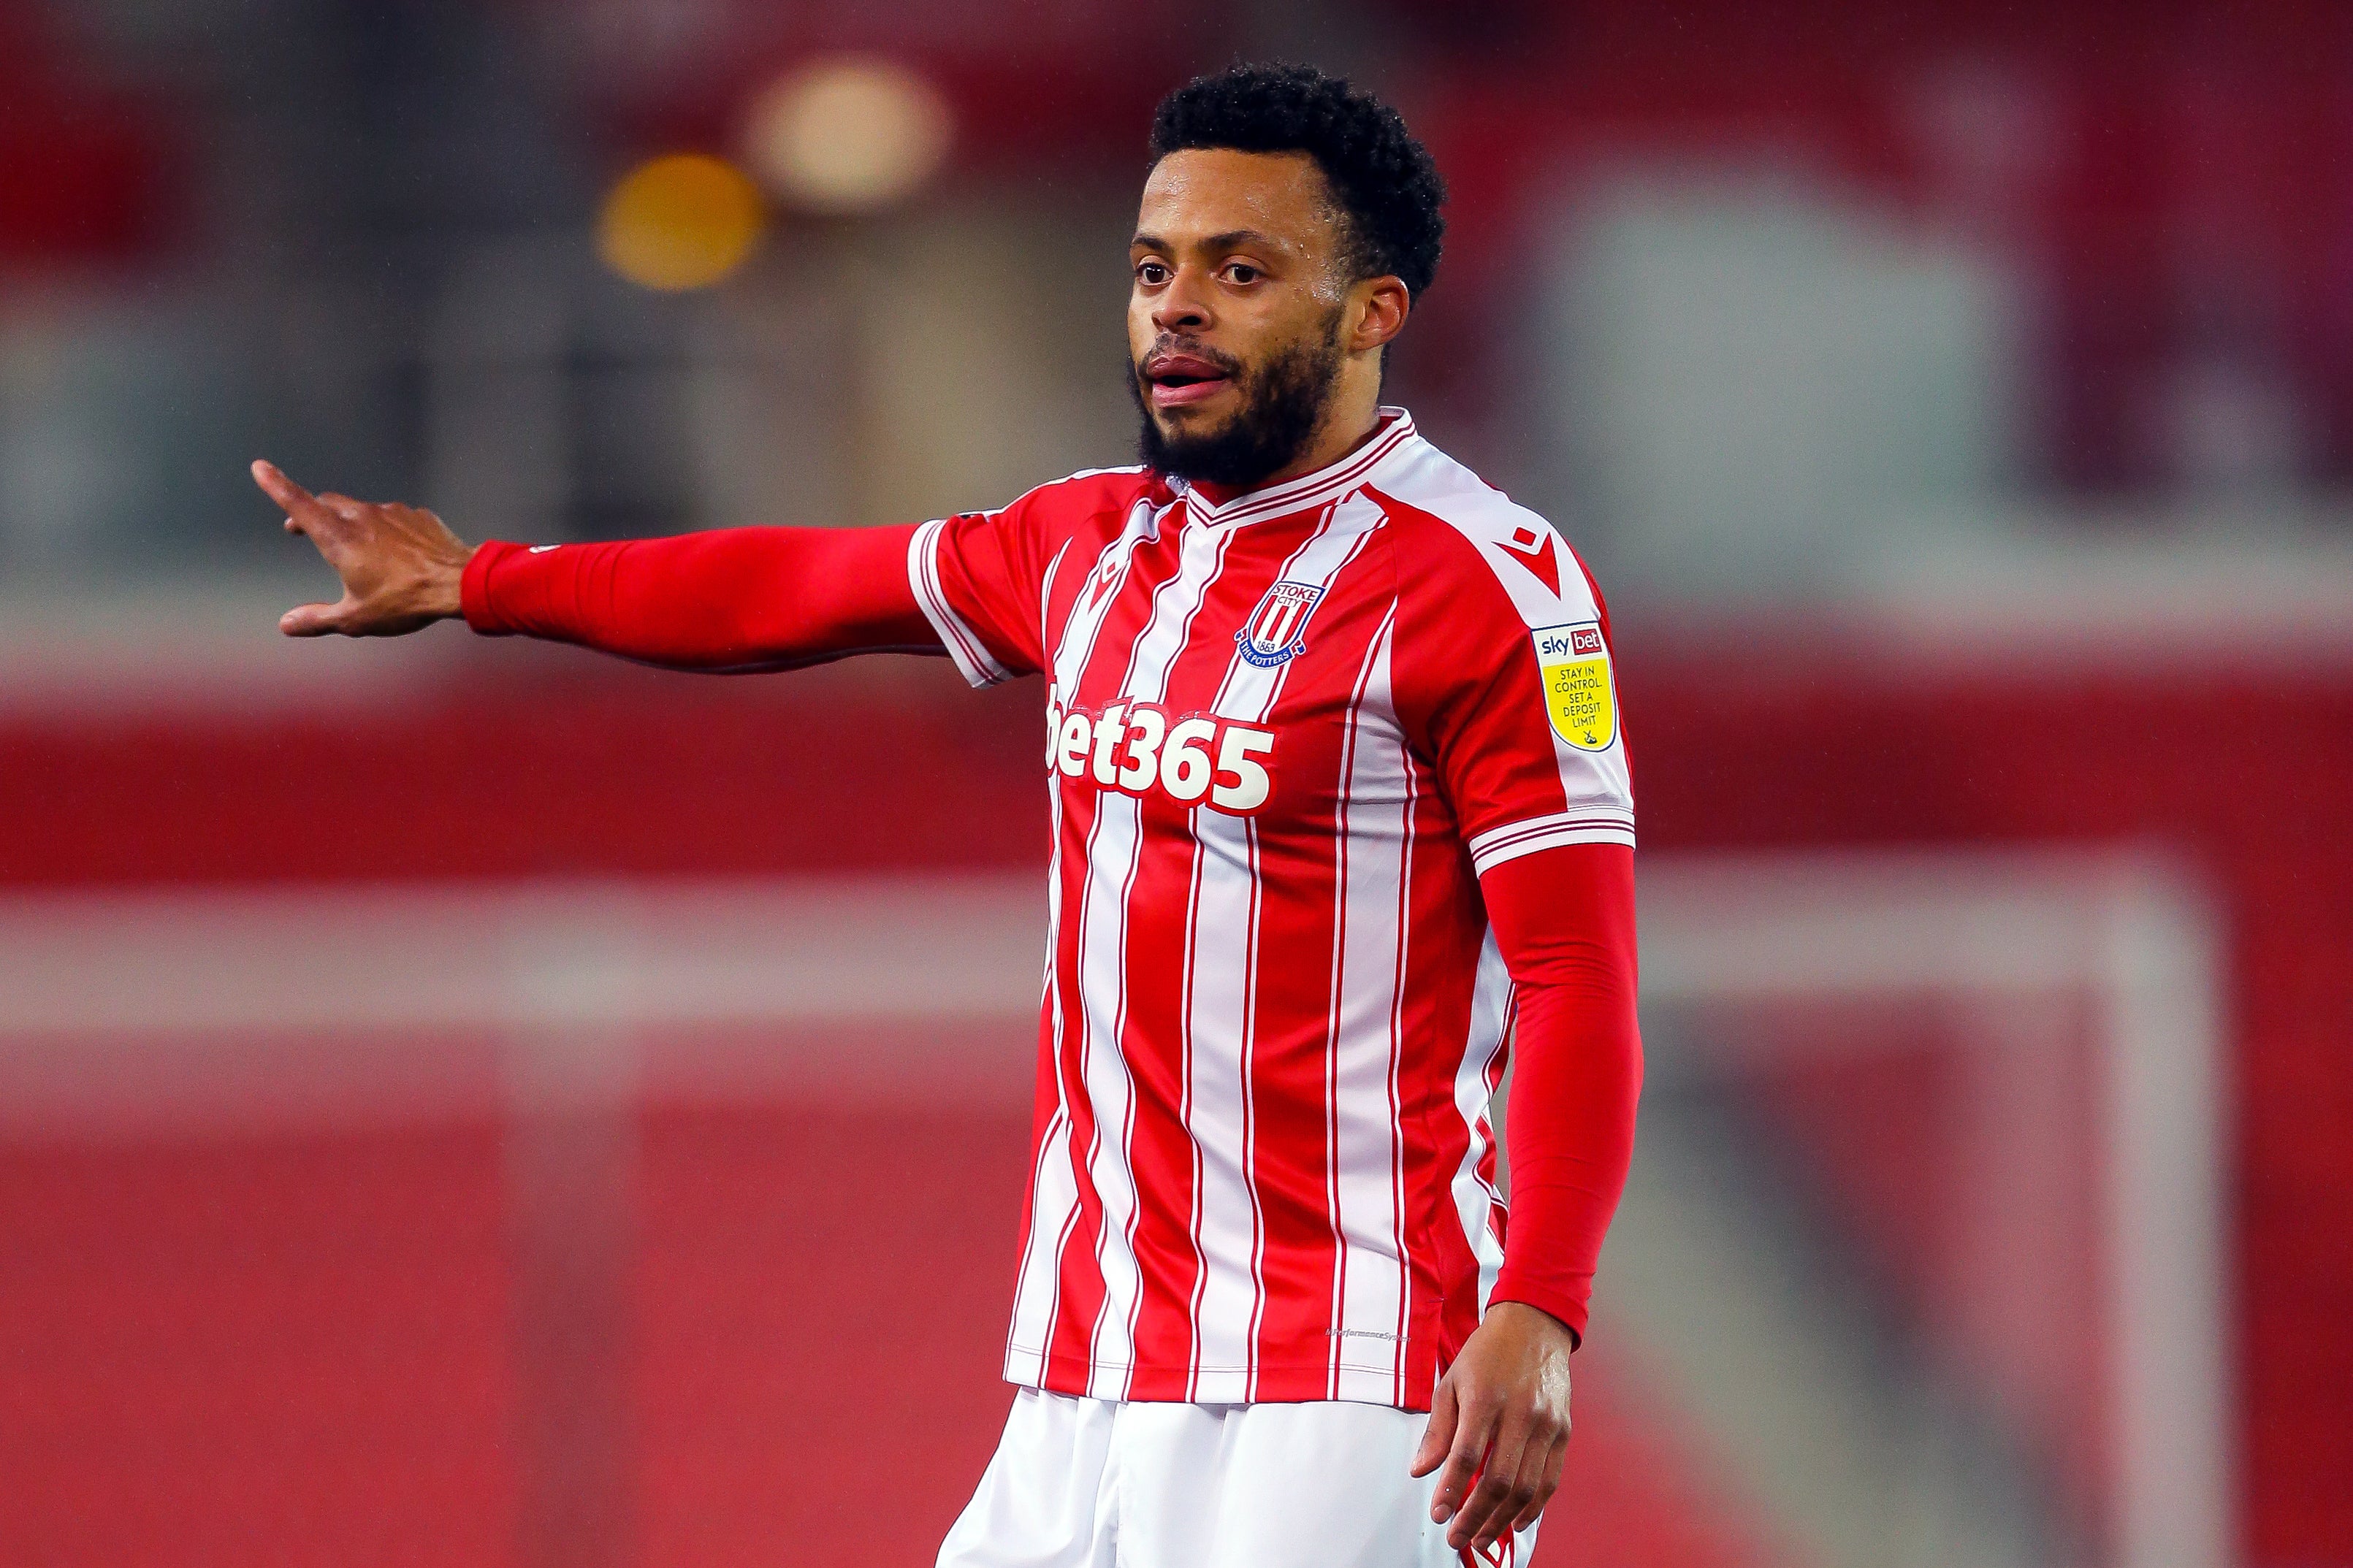 Jordan Cousins spent the past two seasons with Stoke